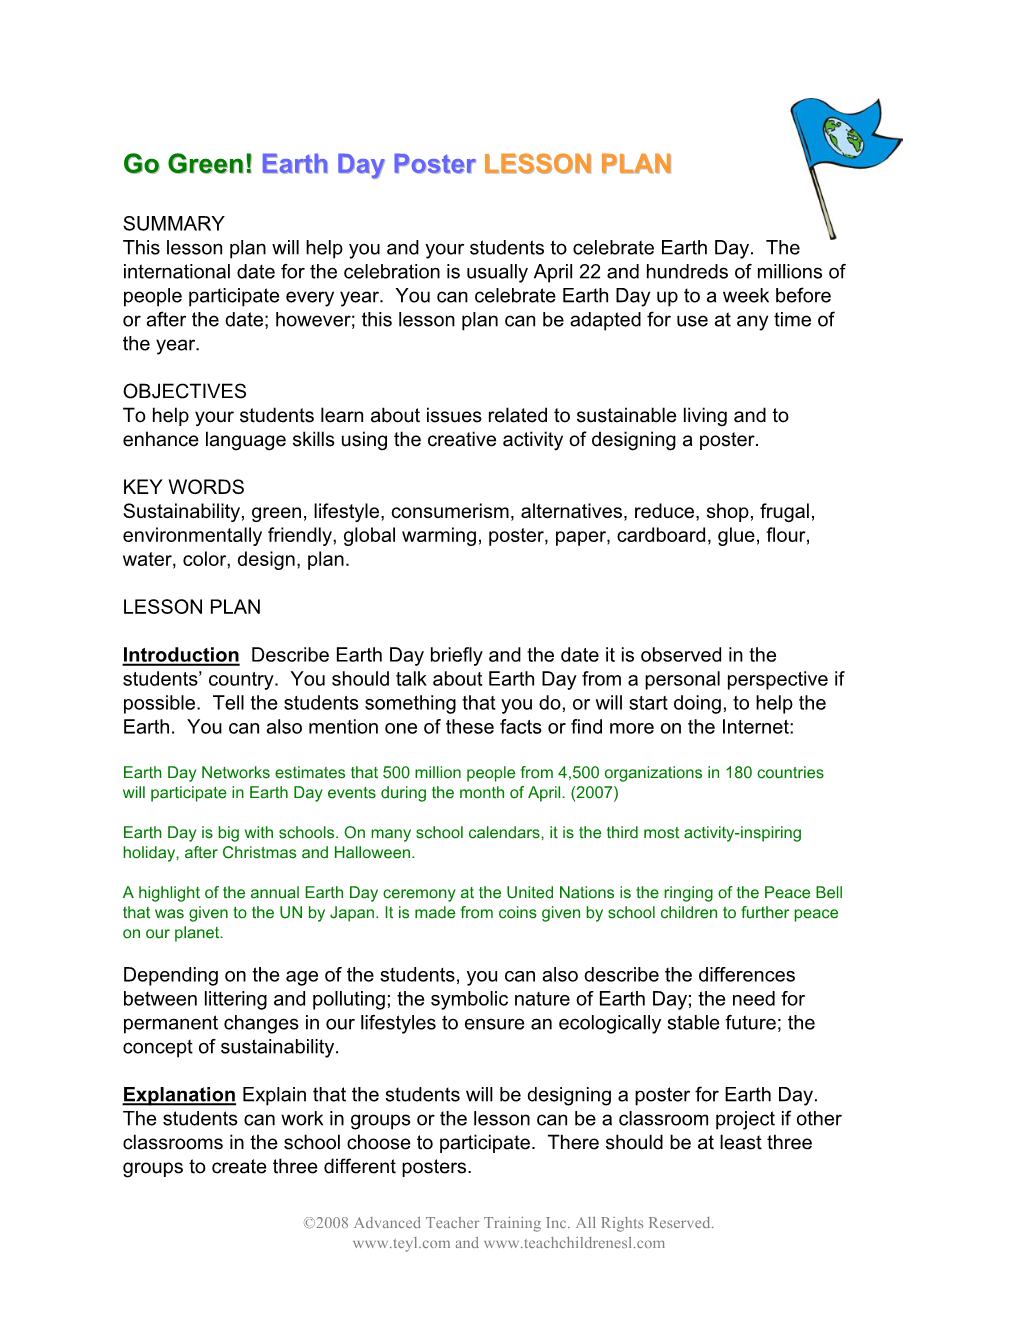 Earth Day Poster LESSON PLAN